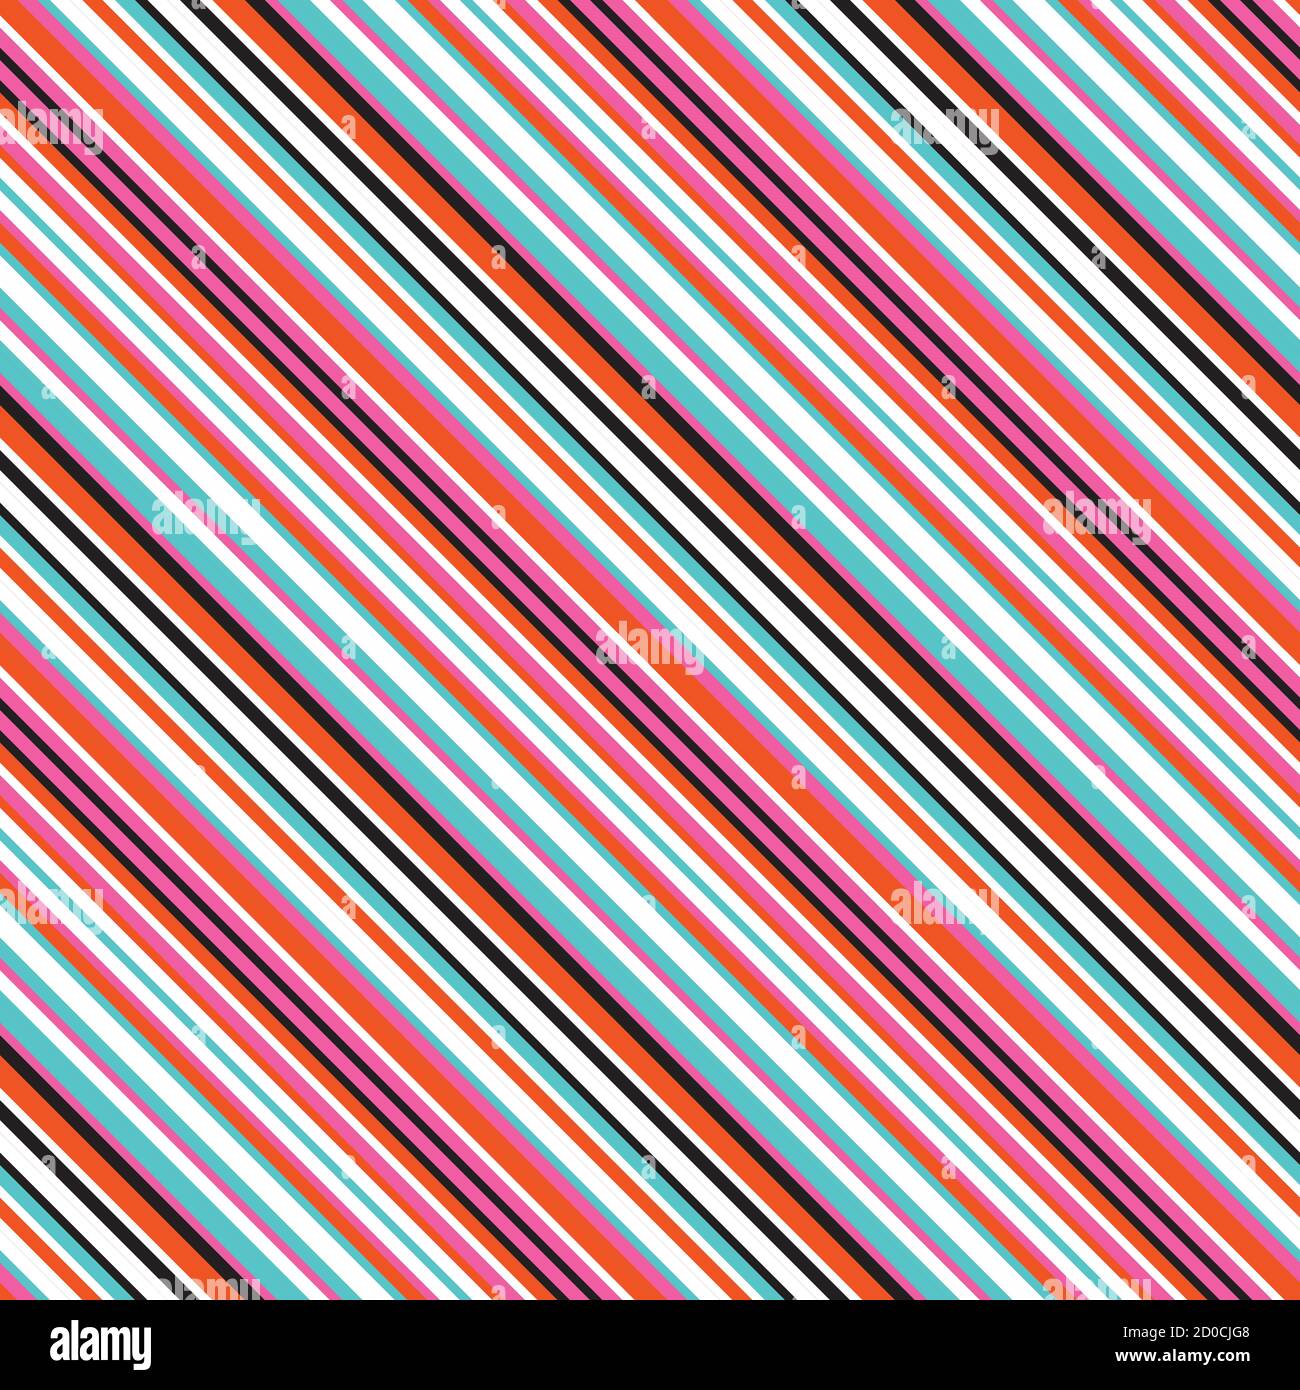 Seamless pattern with oblique colored lines Stock Vector